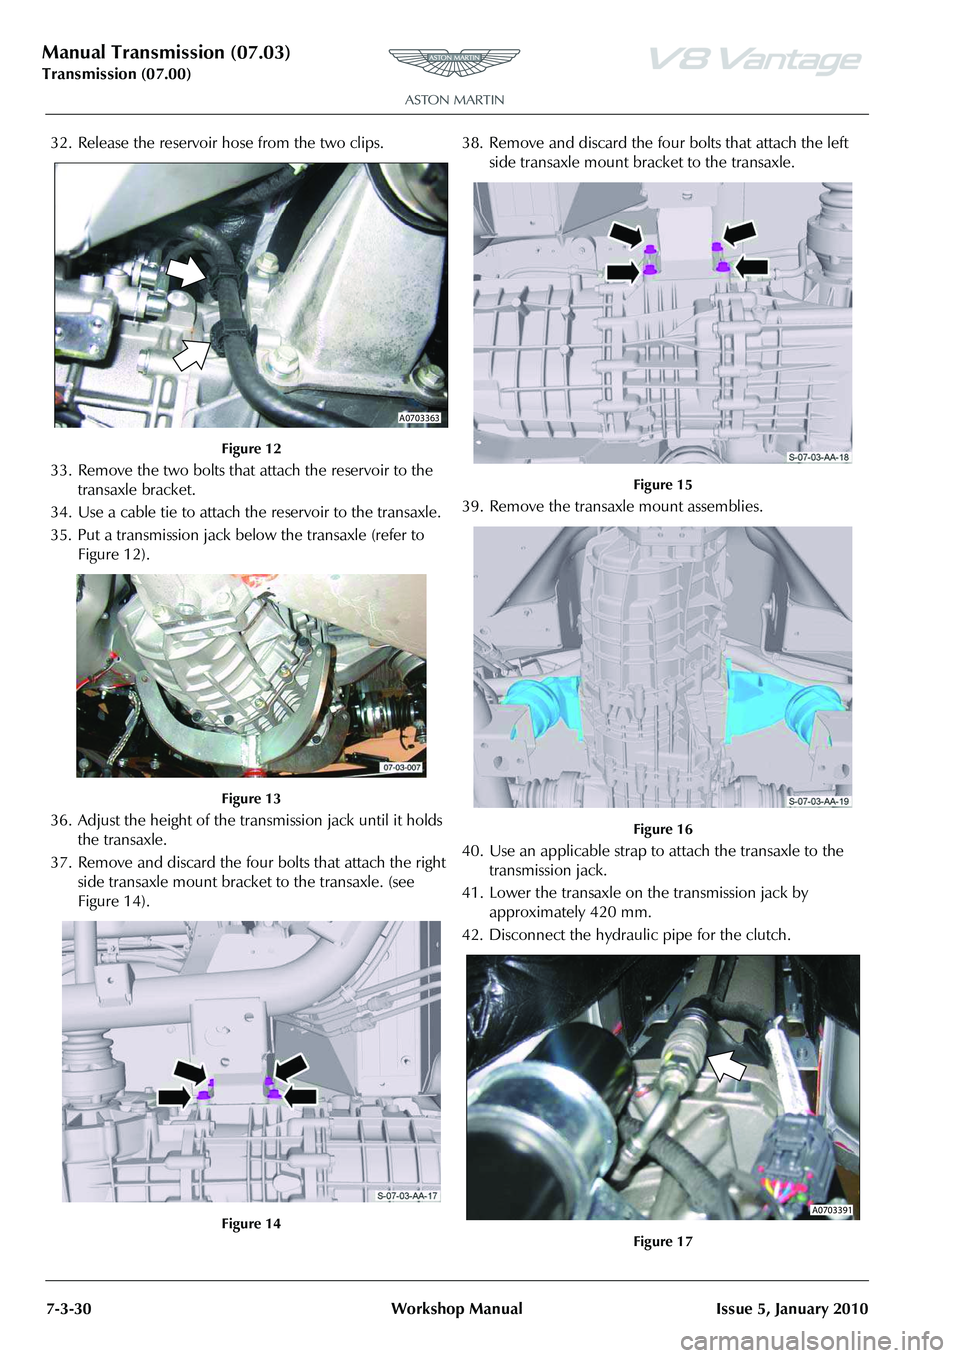 ASTON MARTIN V8 VANTAGE 2010 Owners Guide Manual Transmission (07.03)
Transmission (07.00)7-3-30 Workshop Manual Issue 5, January 2010
32. Release the reservoir hose from the two clips.
Figure 12
33. Remove the two bolts that attach the reser